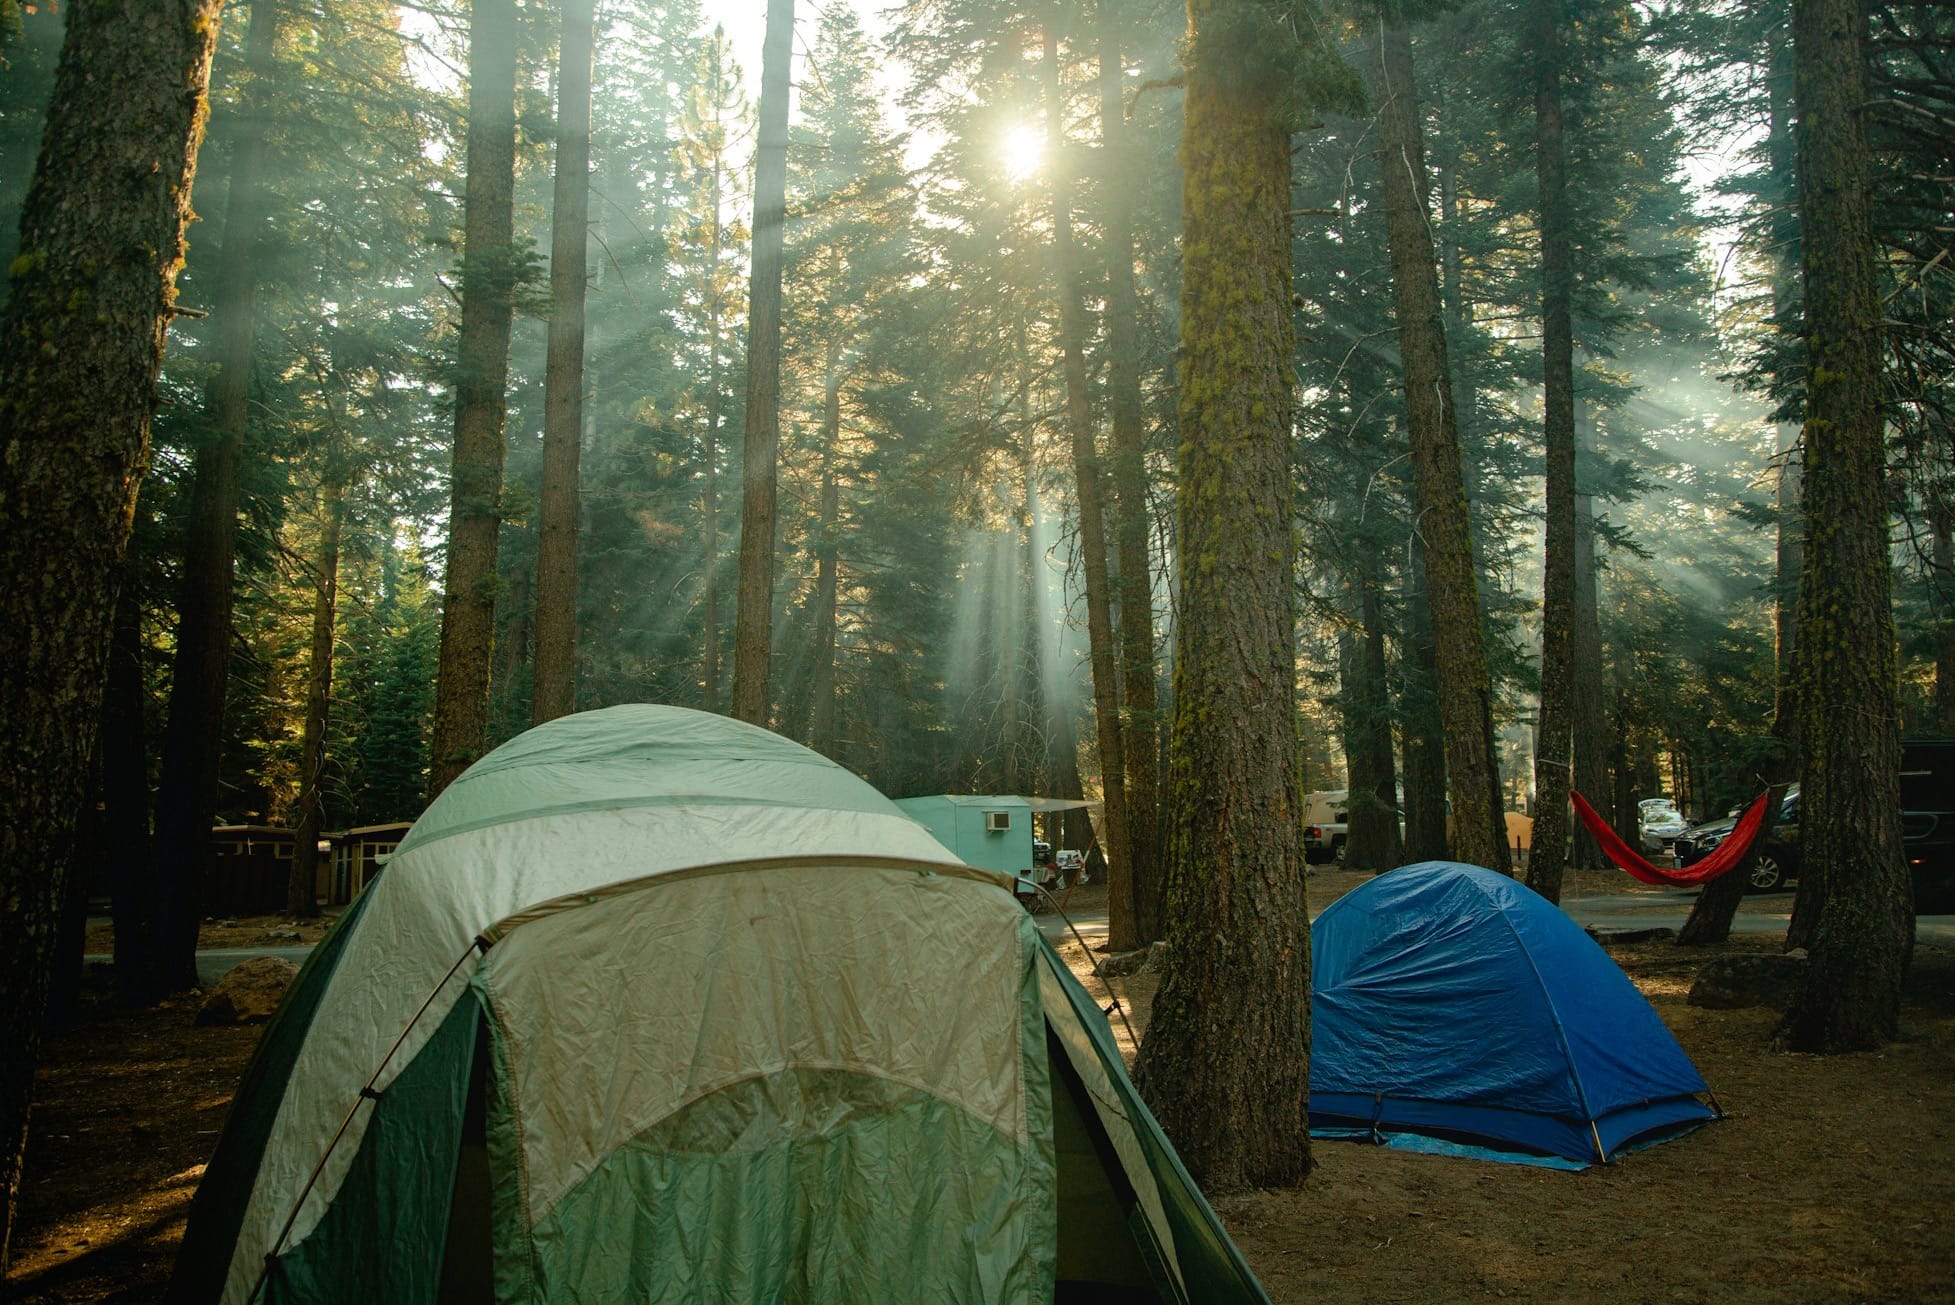 green and gray tent in forest during daytime